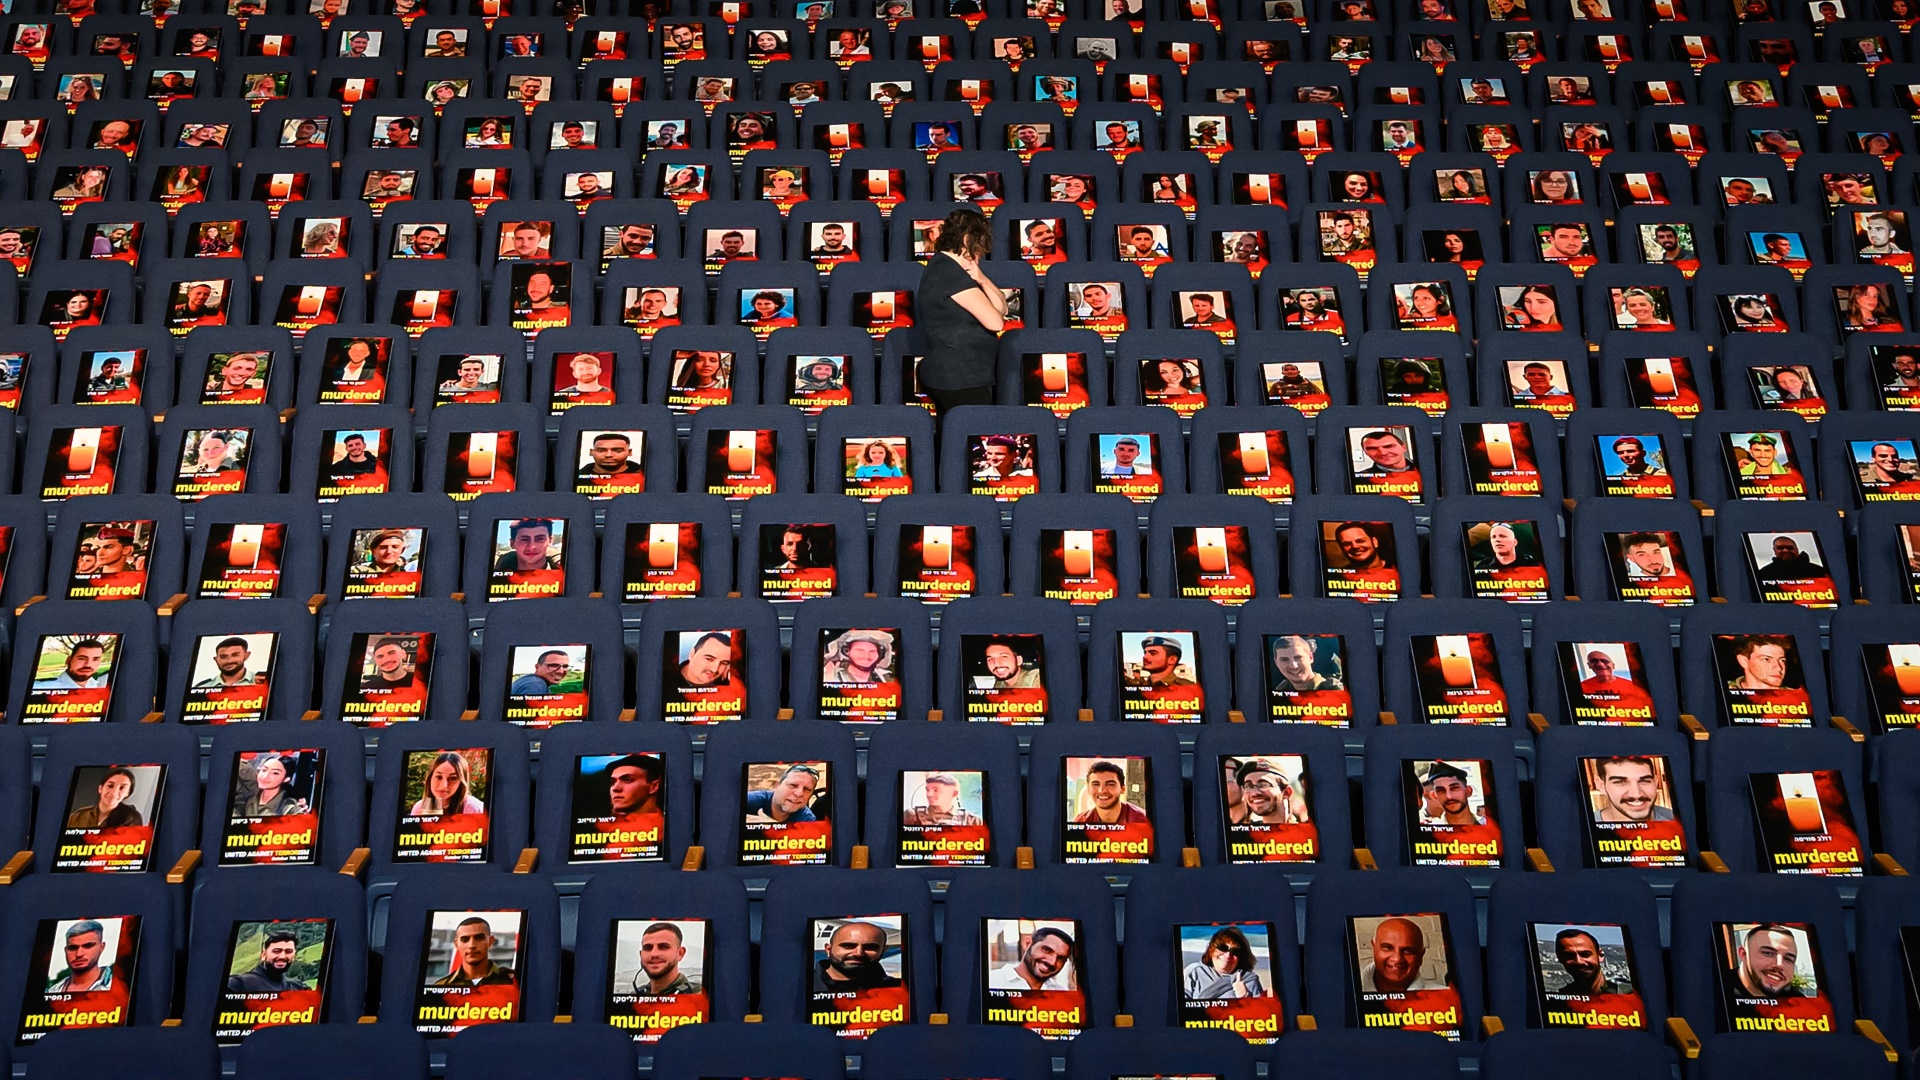 Pictures of more than 1,000 people abducted, missing or killed by Hamas in the October 7 attacks are displayed

on empty seats in the Smolarz Auditorium at Tel Aviv University. Photo: Leon Neal/Getty